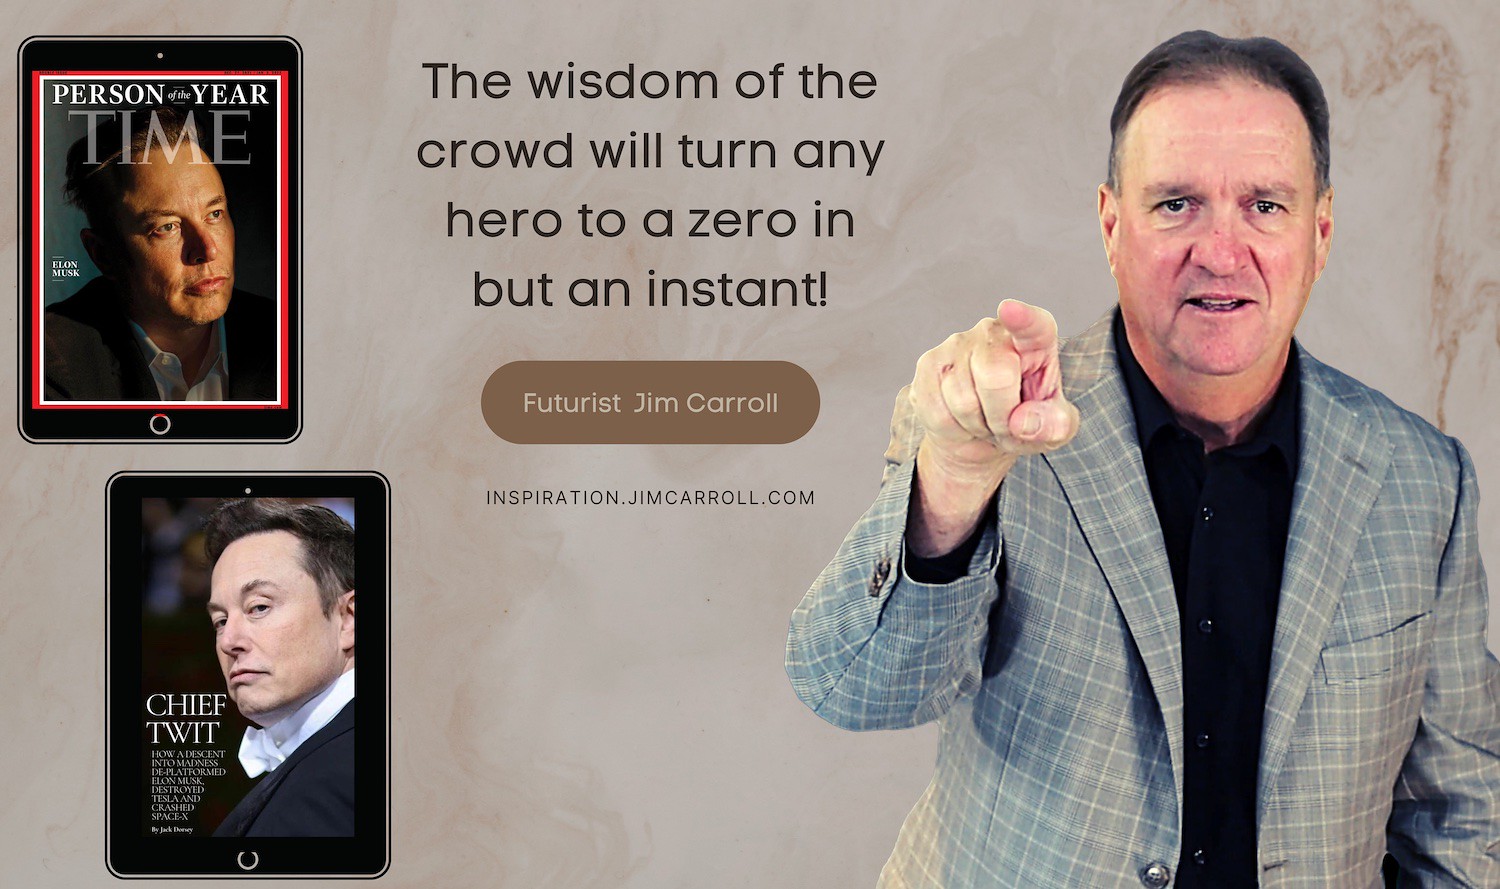 "The wisdom of the crowd will turn any hero to a zero in but an instant!" - Futurist Jim Carroll